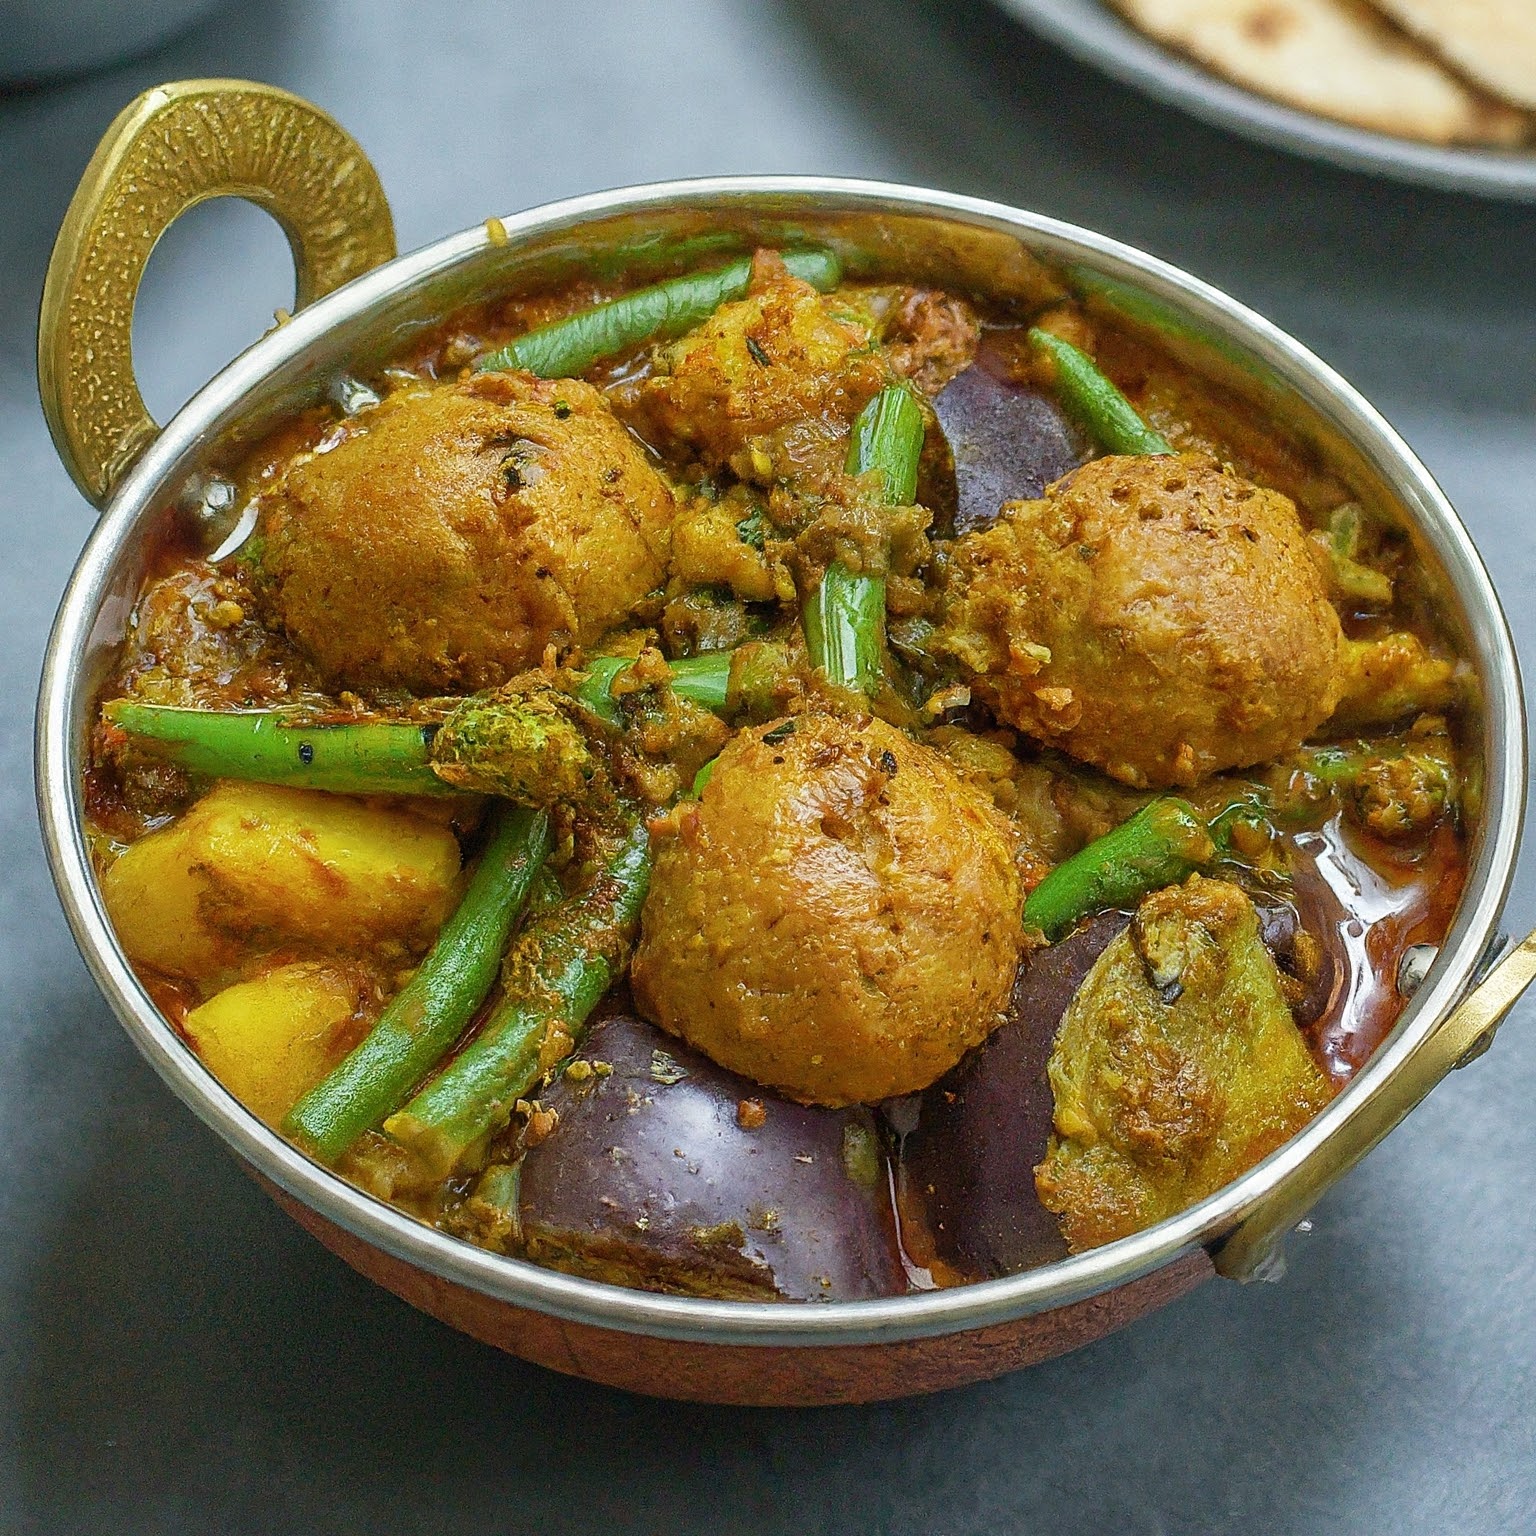 A colourful bowl of Undhiyu, a Gujarati vegetable curry with seasonal vegetables and dumplings.